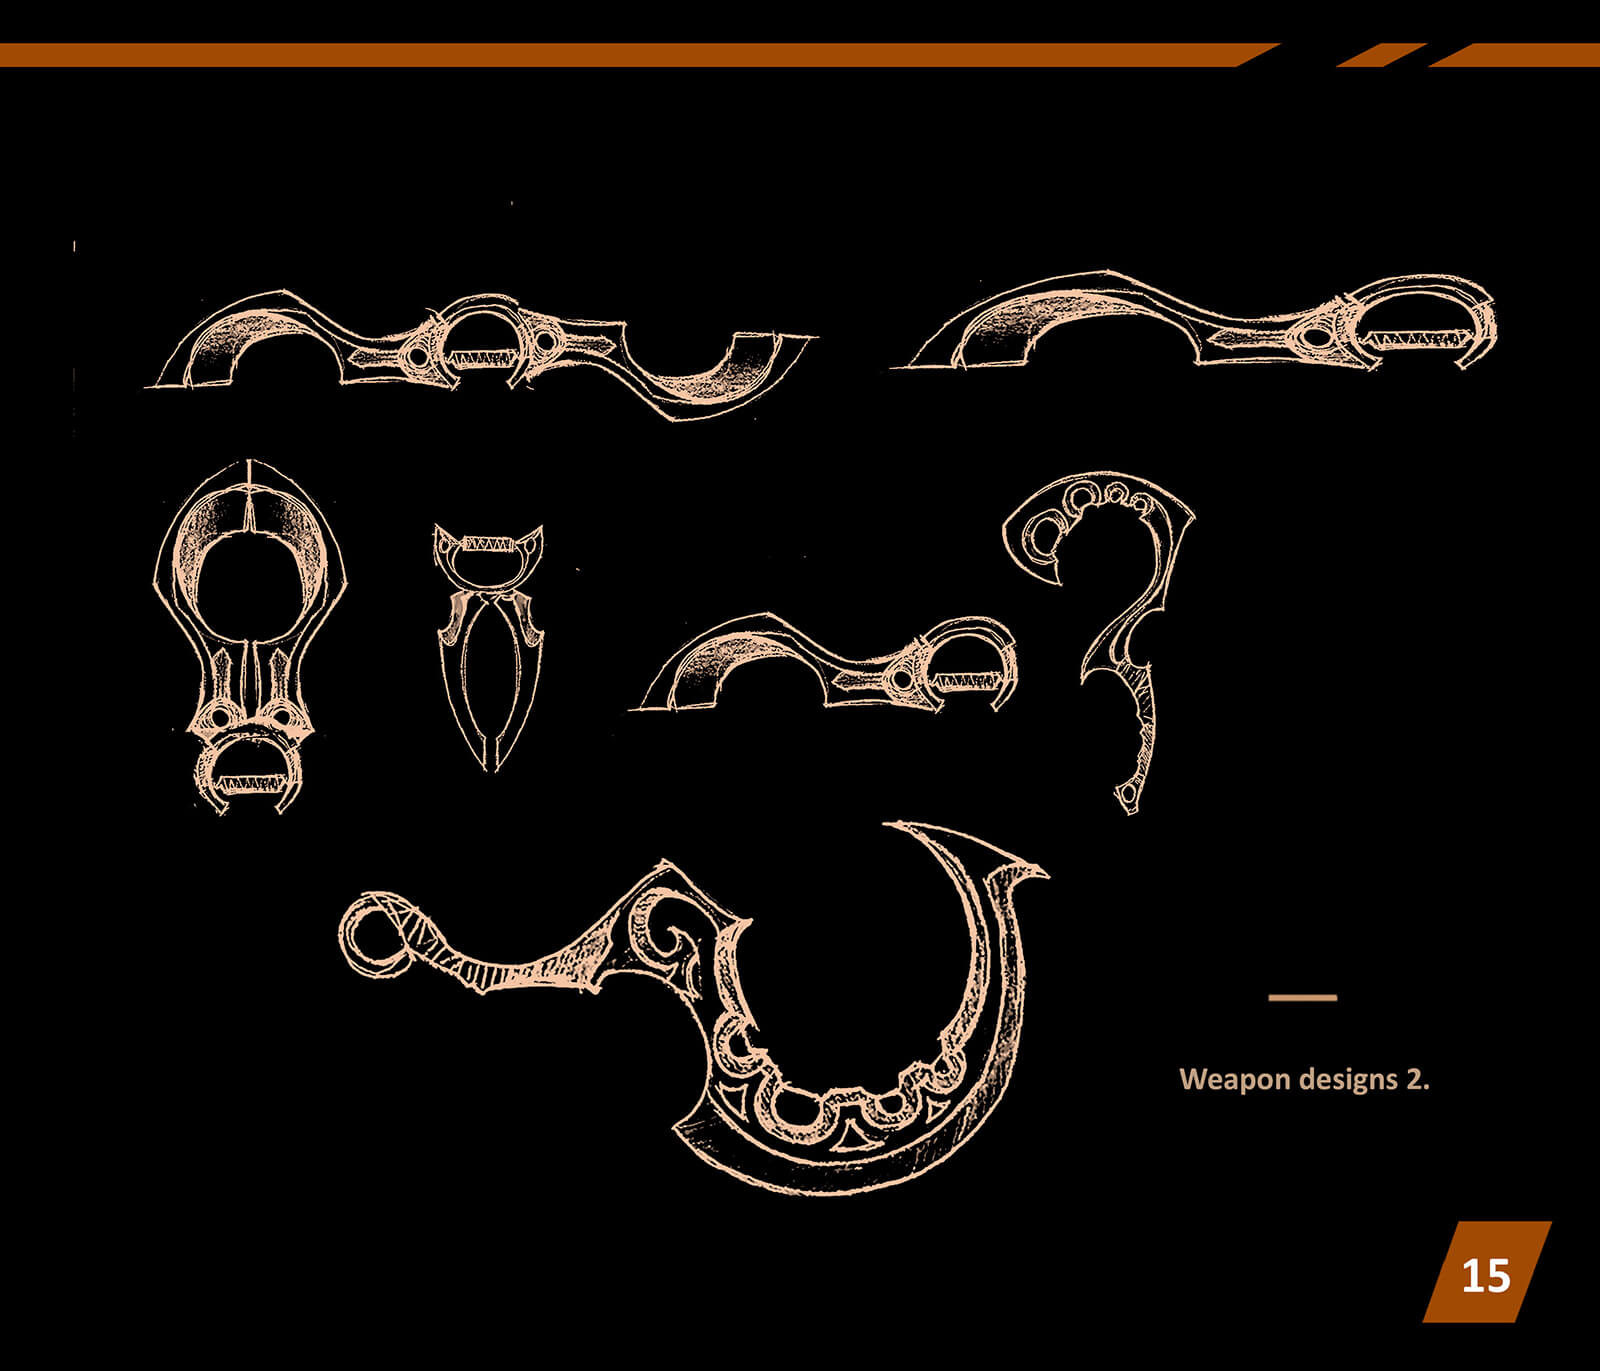 Black and white concept sketches of elaborate, curved swords, daggers, and khopeshes